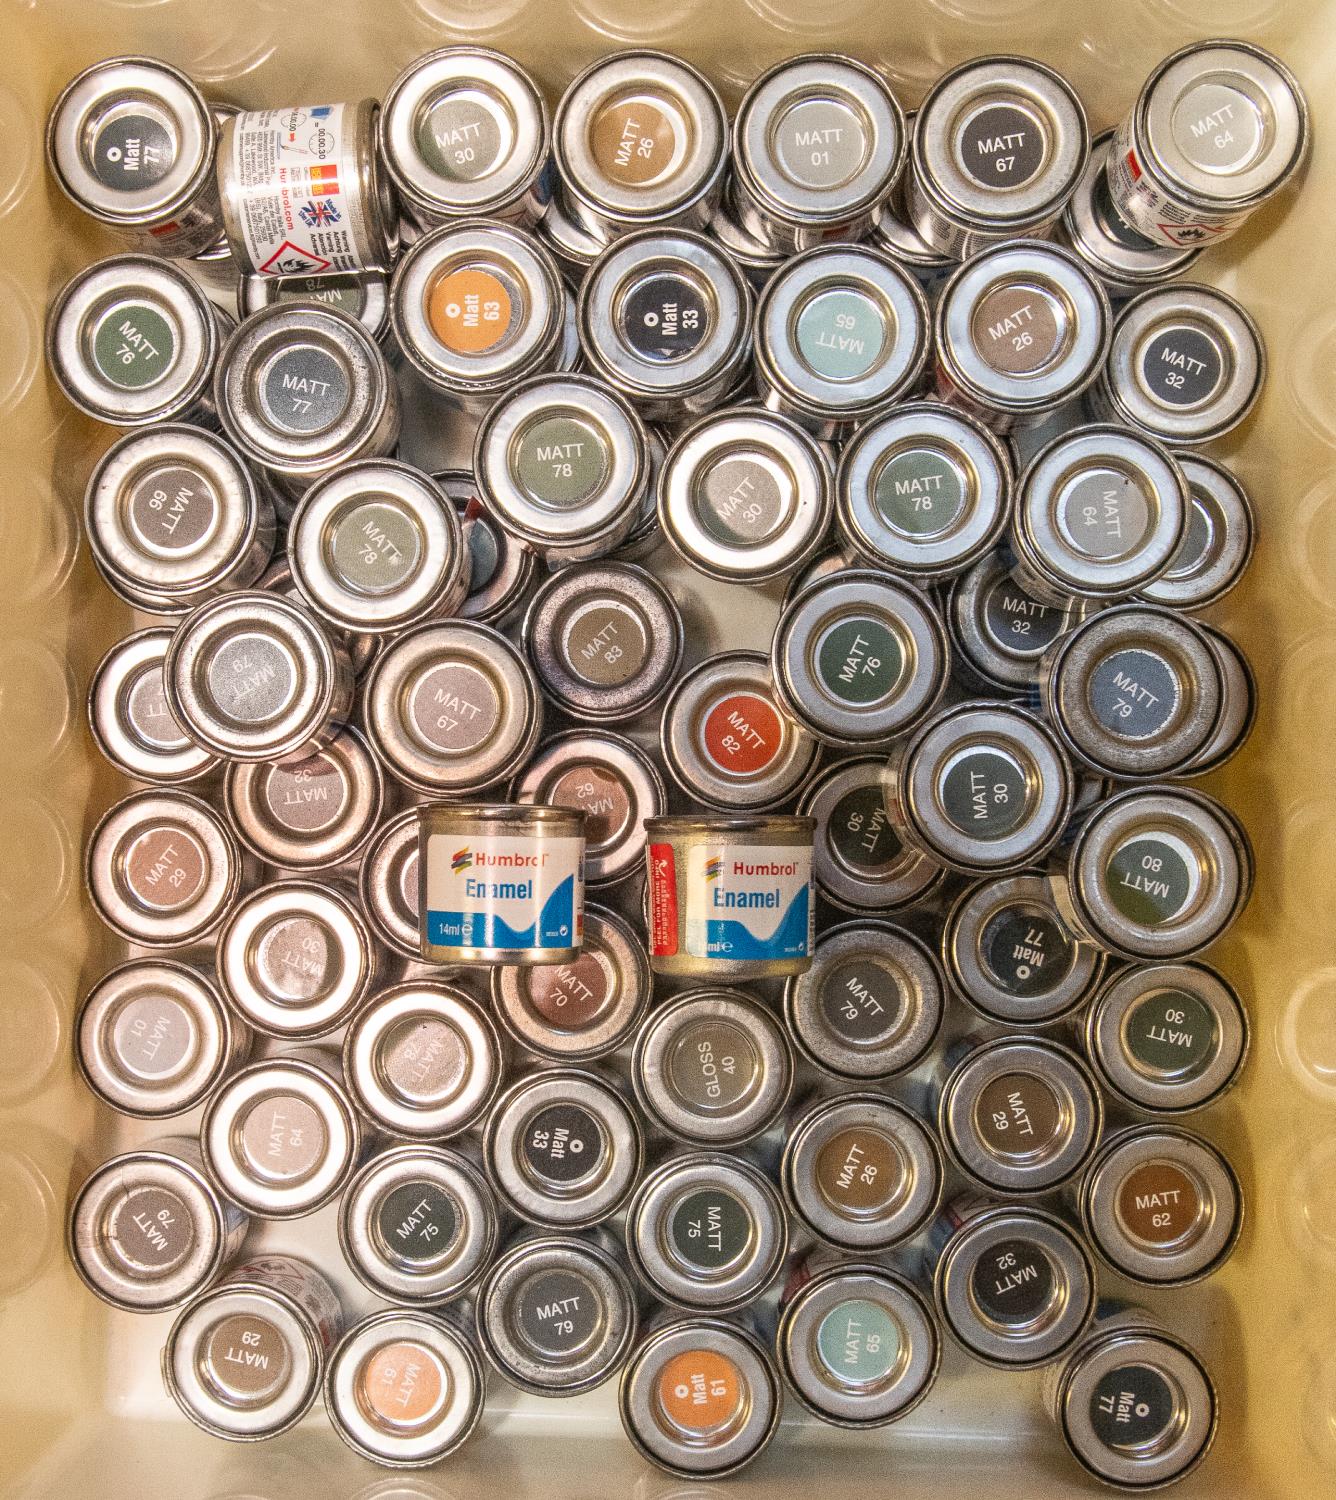 85 assorted matt Humbrol enamel paints, various colours, (some duplication). All brand new and